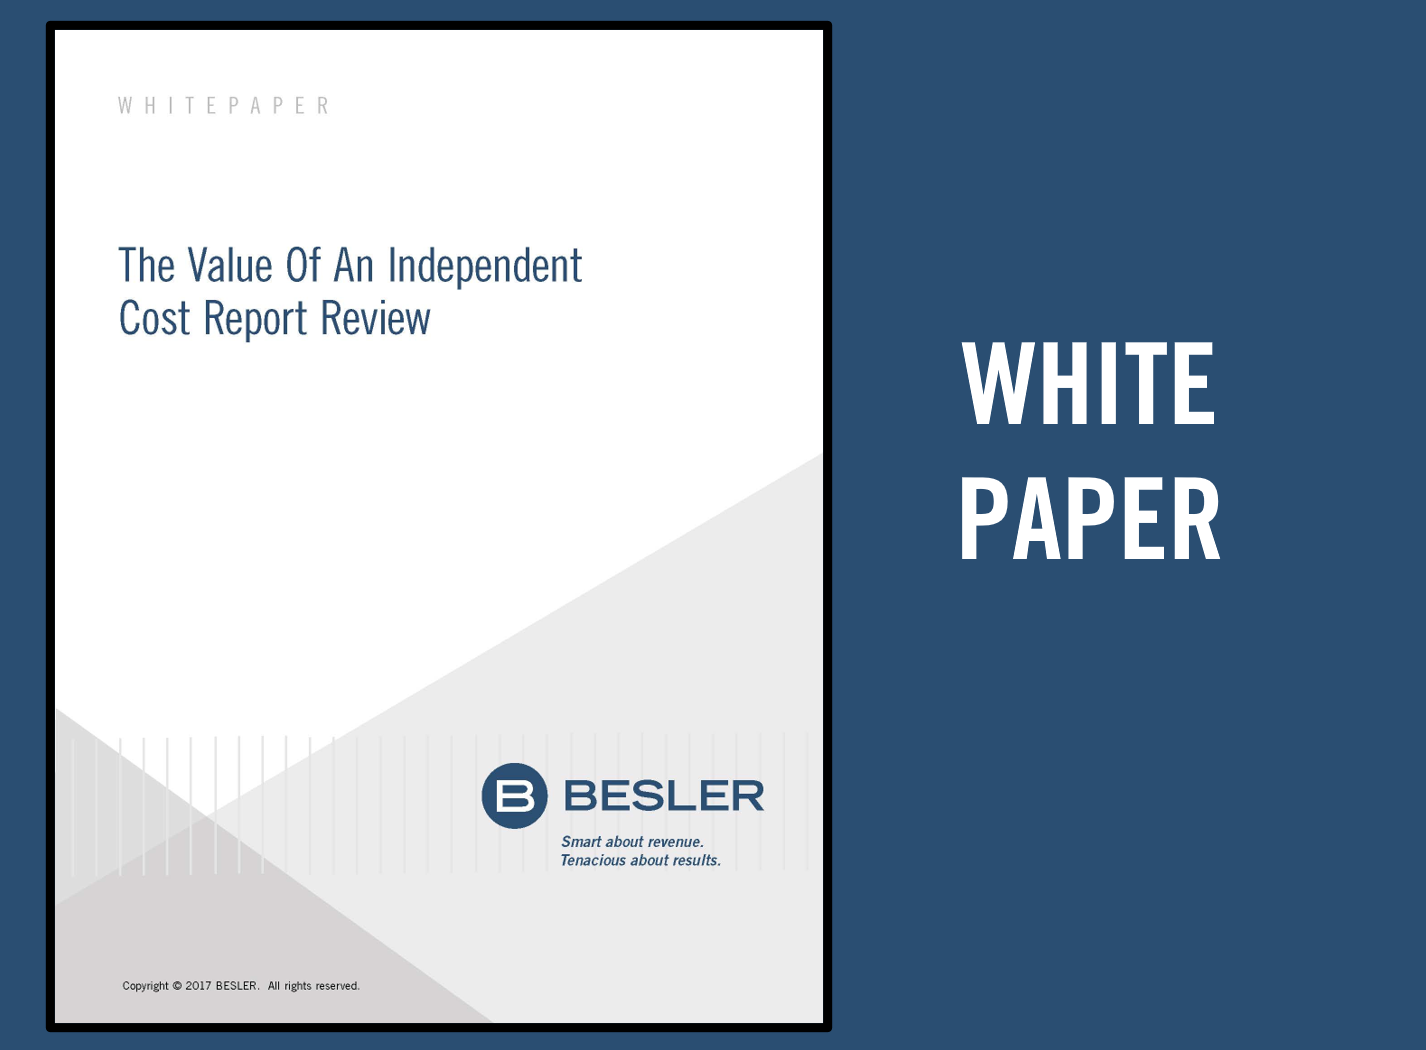 The Value of an Independent Cost Report Review